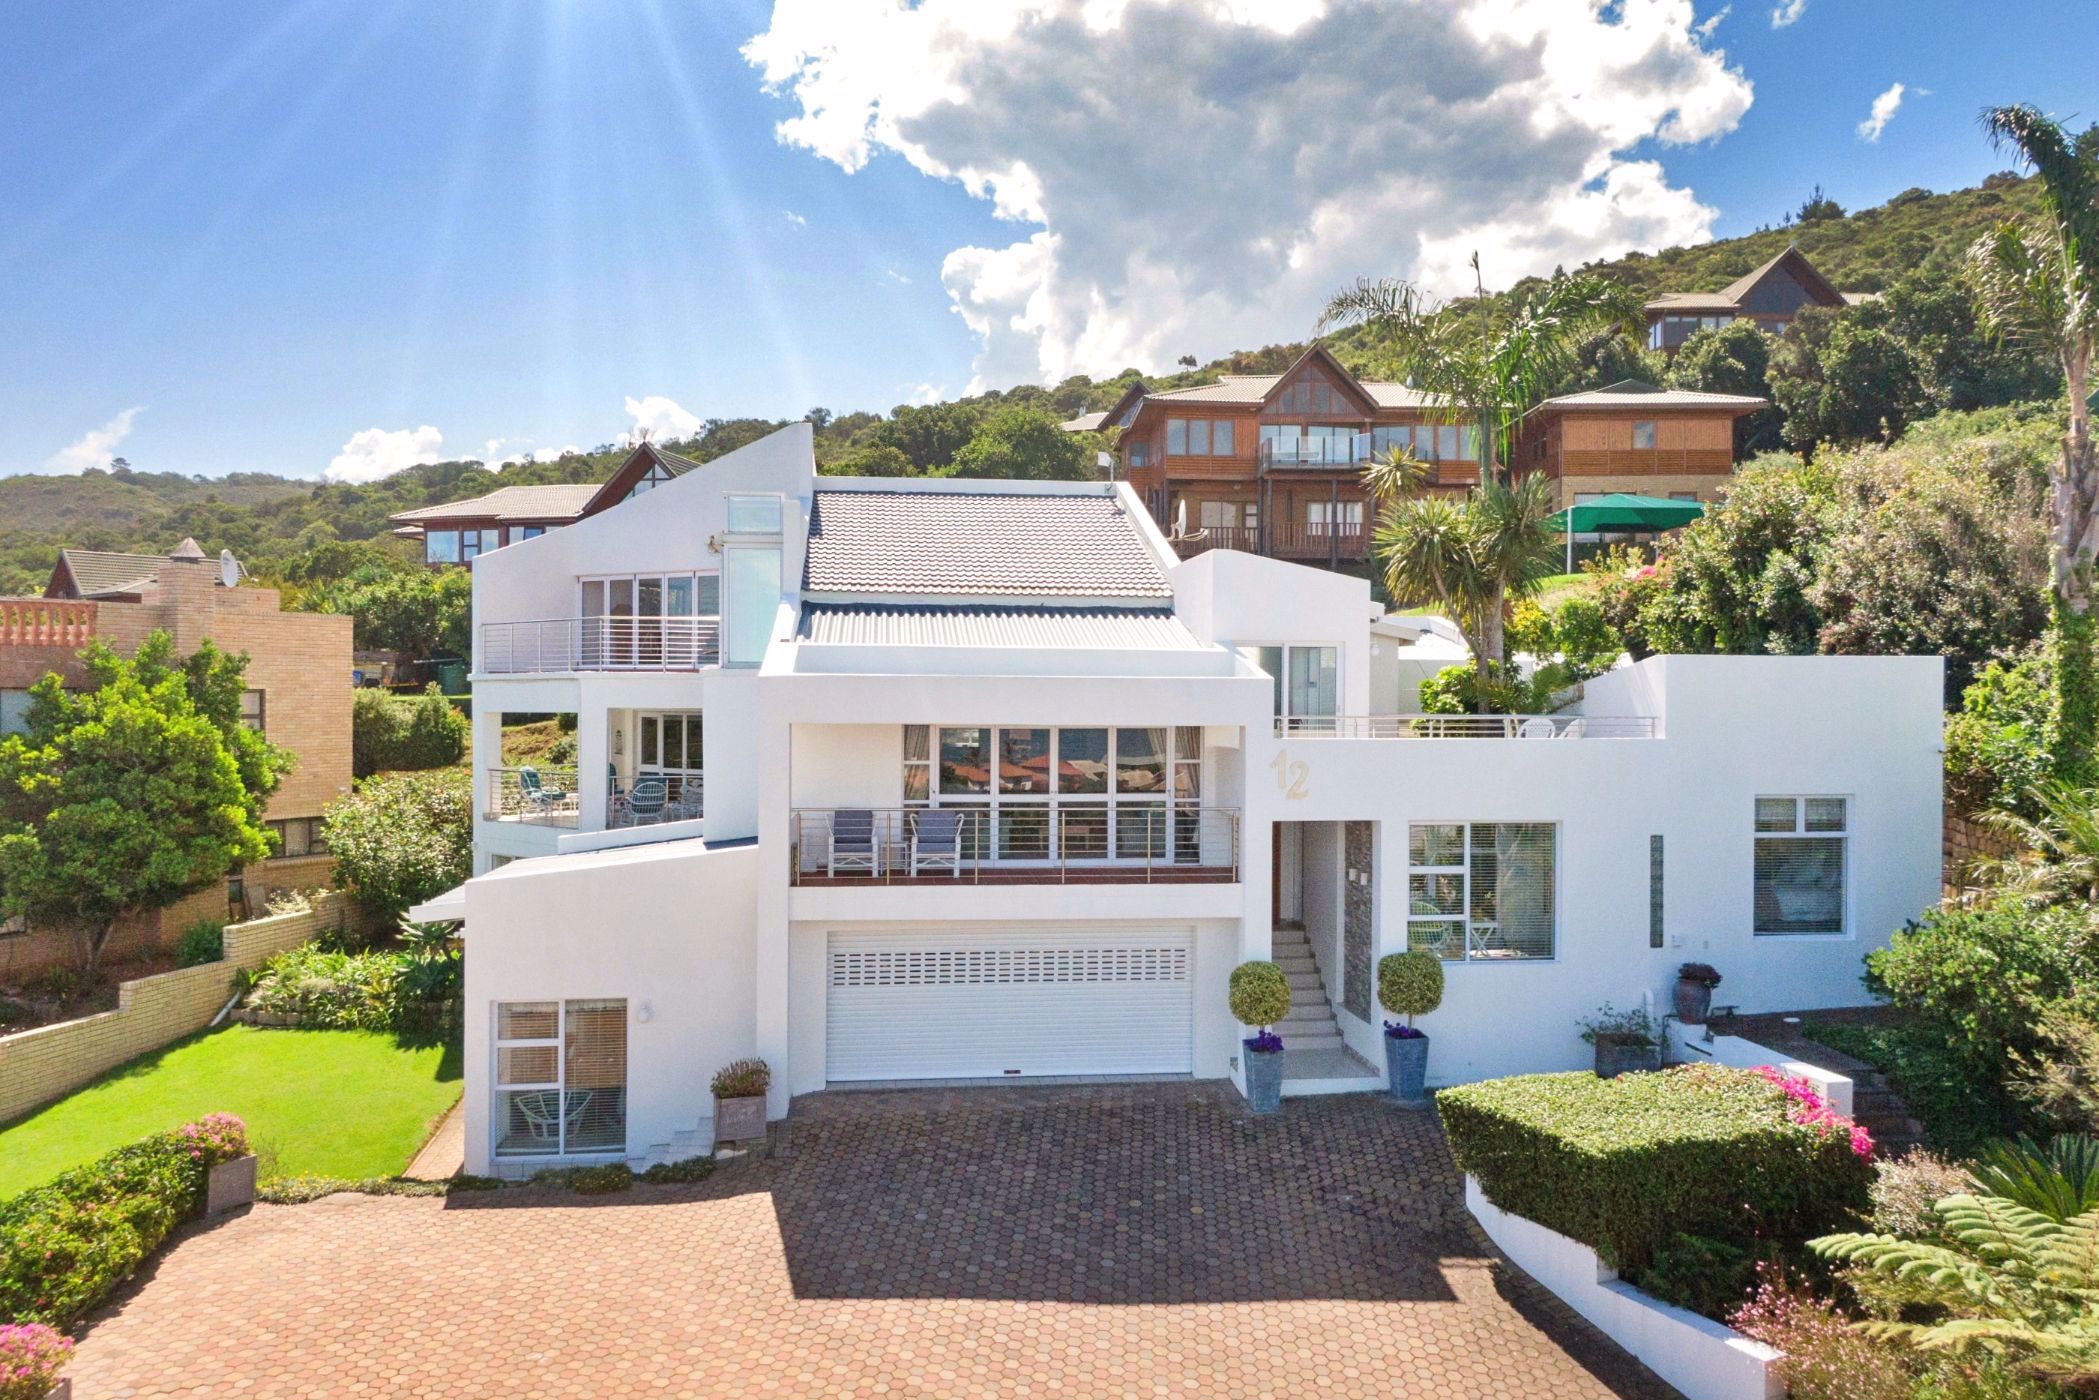 5 bedroom house for sale in Outeniqua Strand